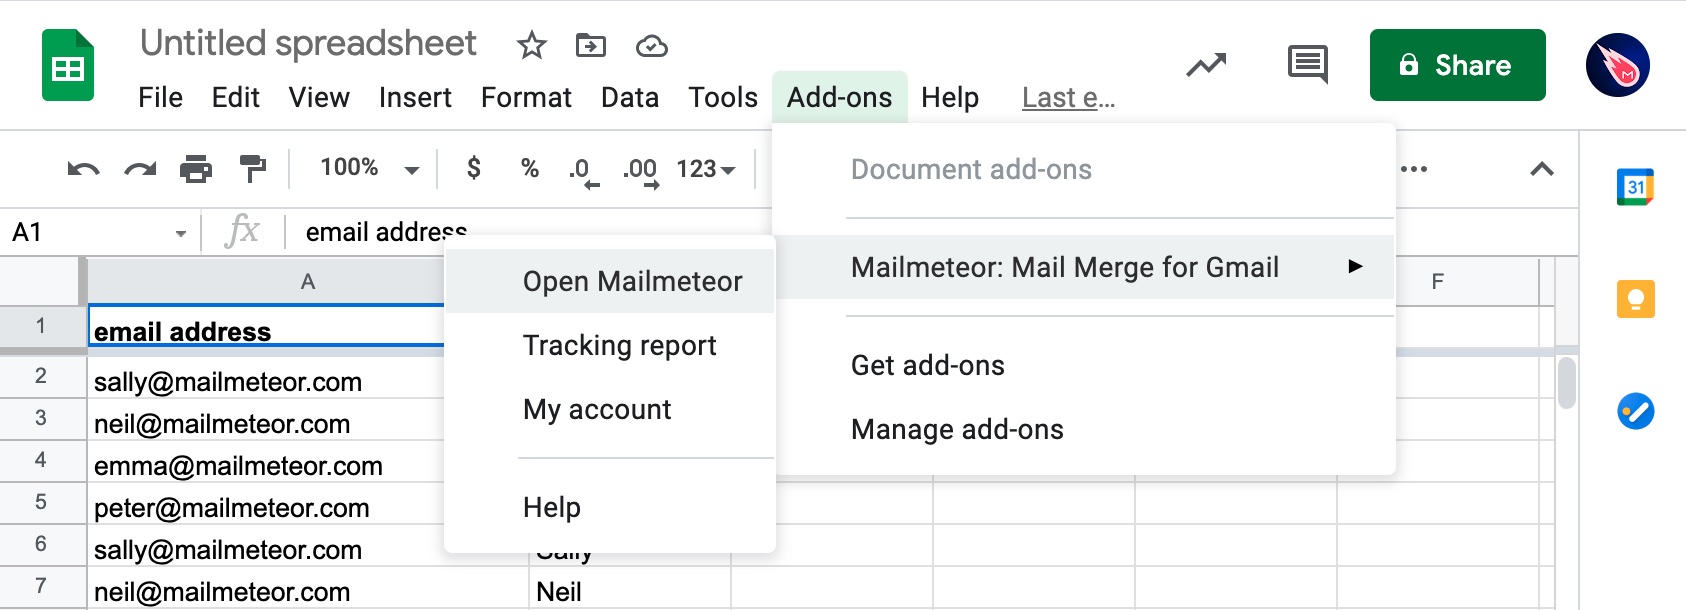 Open Mailmeteor from the Add-ons menu in Google Sheets